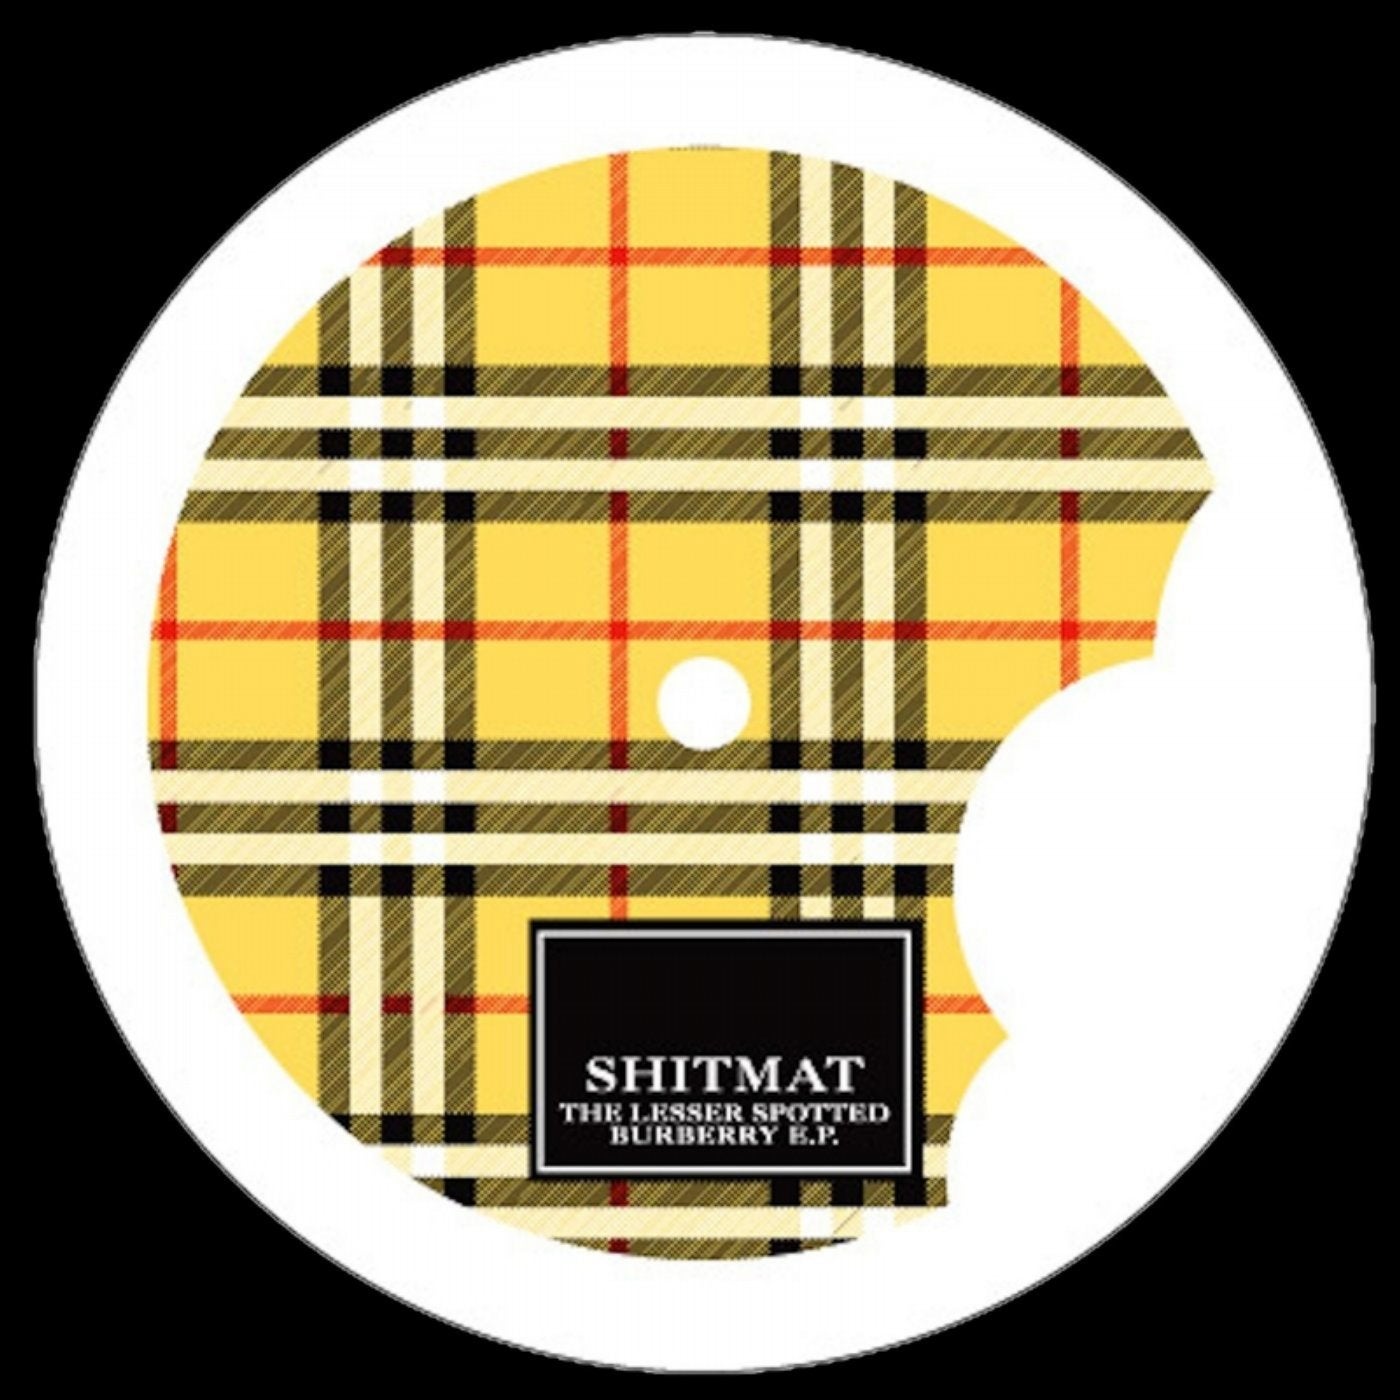 The Lesser Spotted Burberry EP